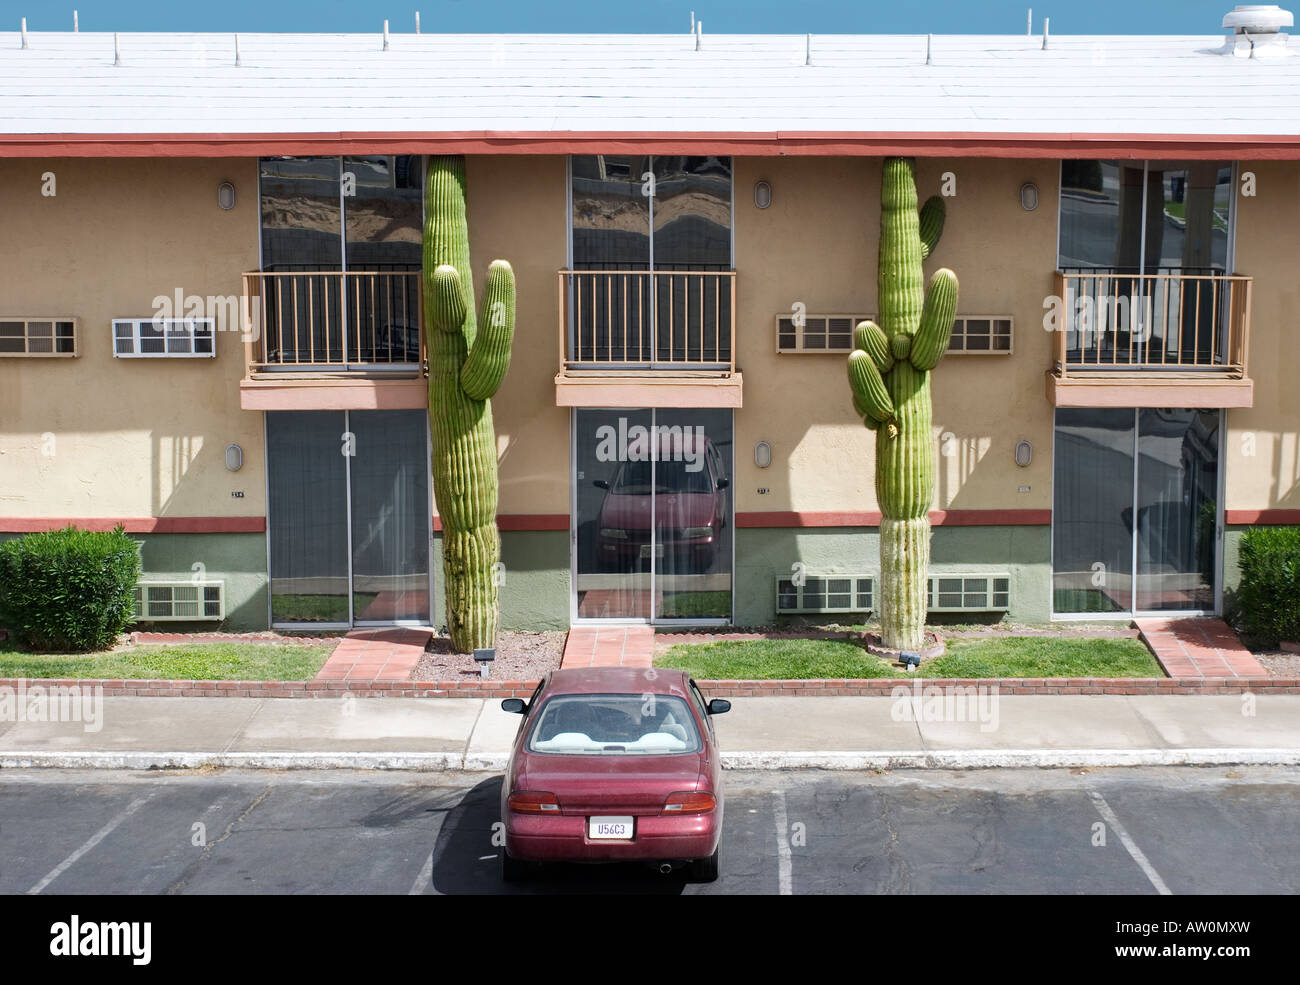 Two saguaro cactus trees appear to be pushing up the roof of an apartment building in Barstow, California, USA Stock Photo